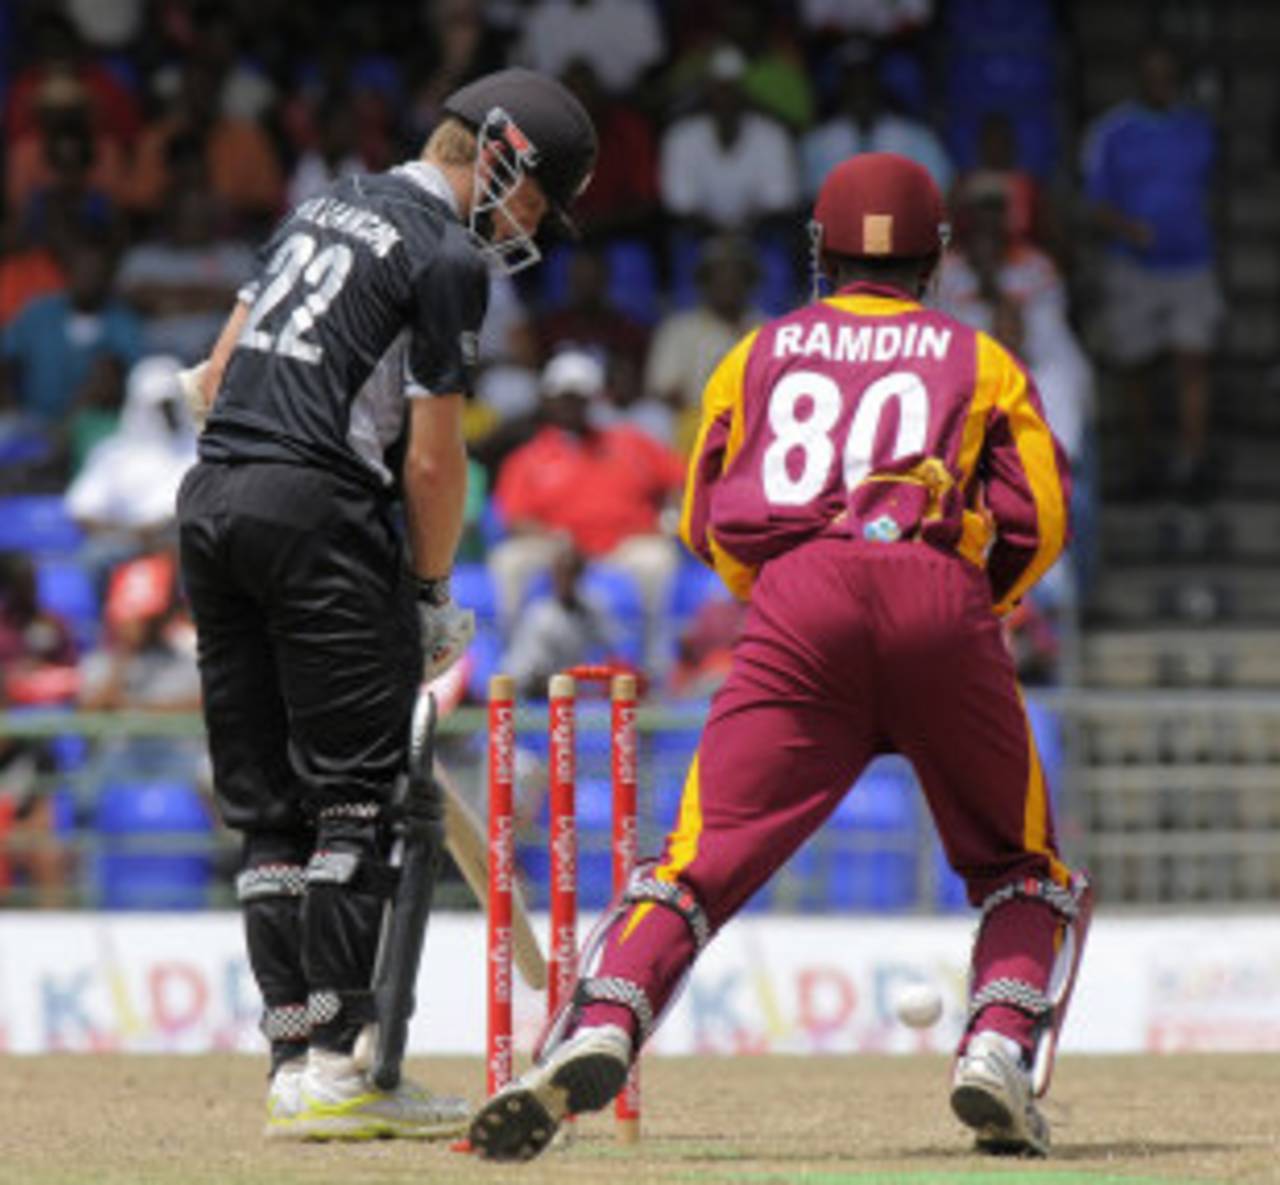 West Indies were happy to restrict New Zealand to 249, but were bowled out for 161 in reply&nbsp;&nbsp;&bull;&nbsp;&nbsp;DigicelCricket.com